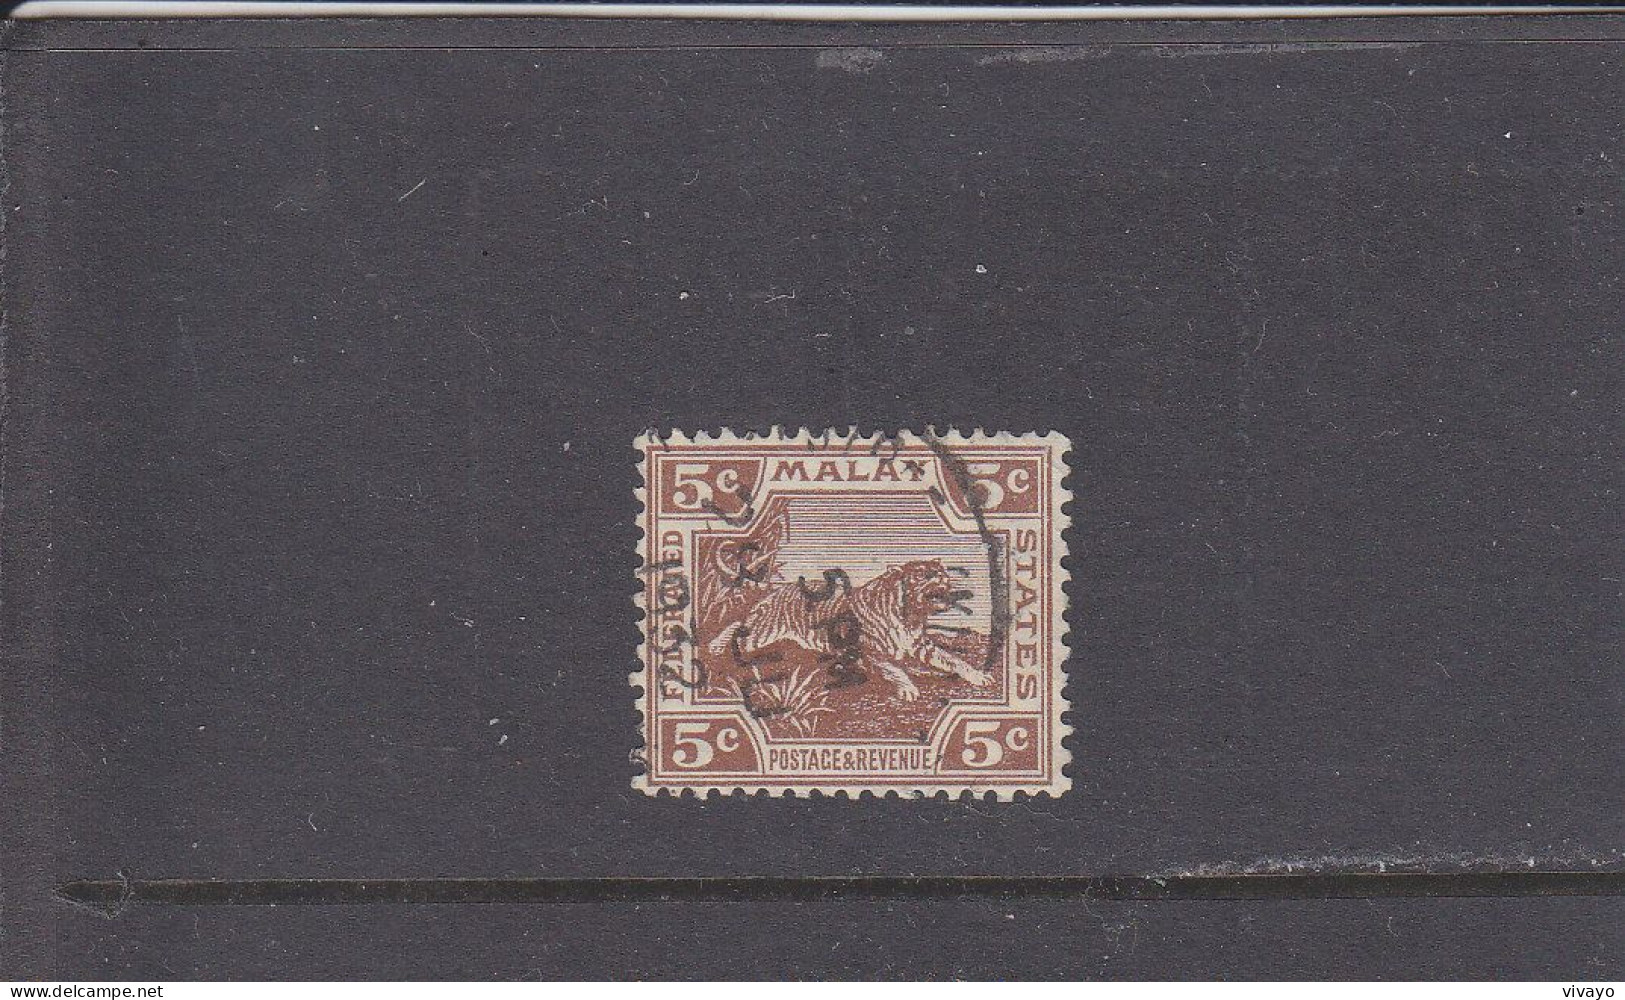 FEDERATED MALAY STATES - O / FINE CANCELLED - 1932 - TIGER - TIGRE - Mi. 60 - Federated Malay States